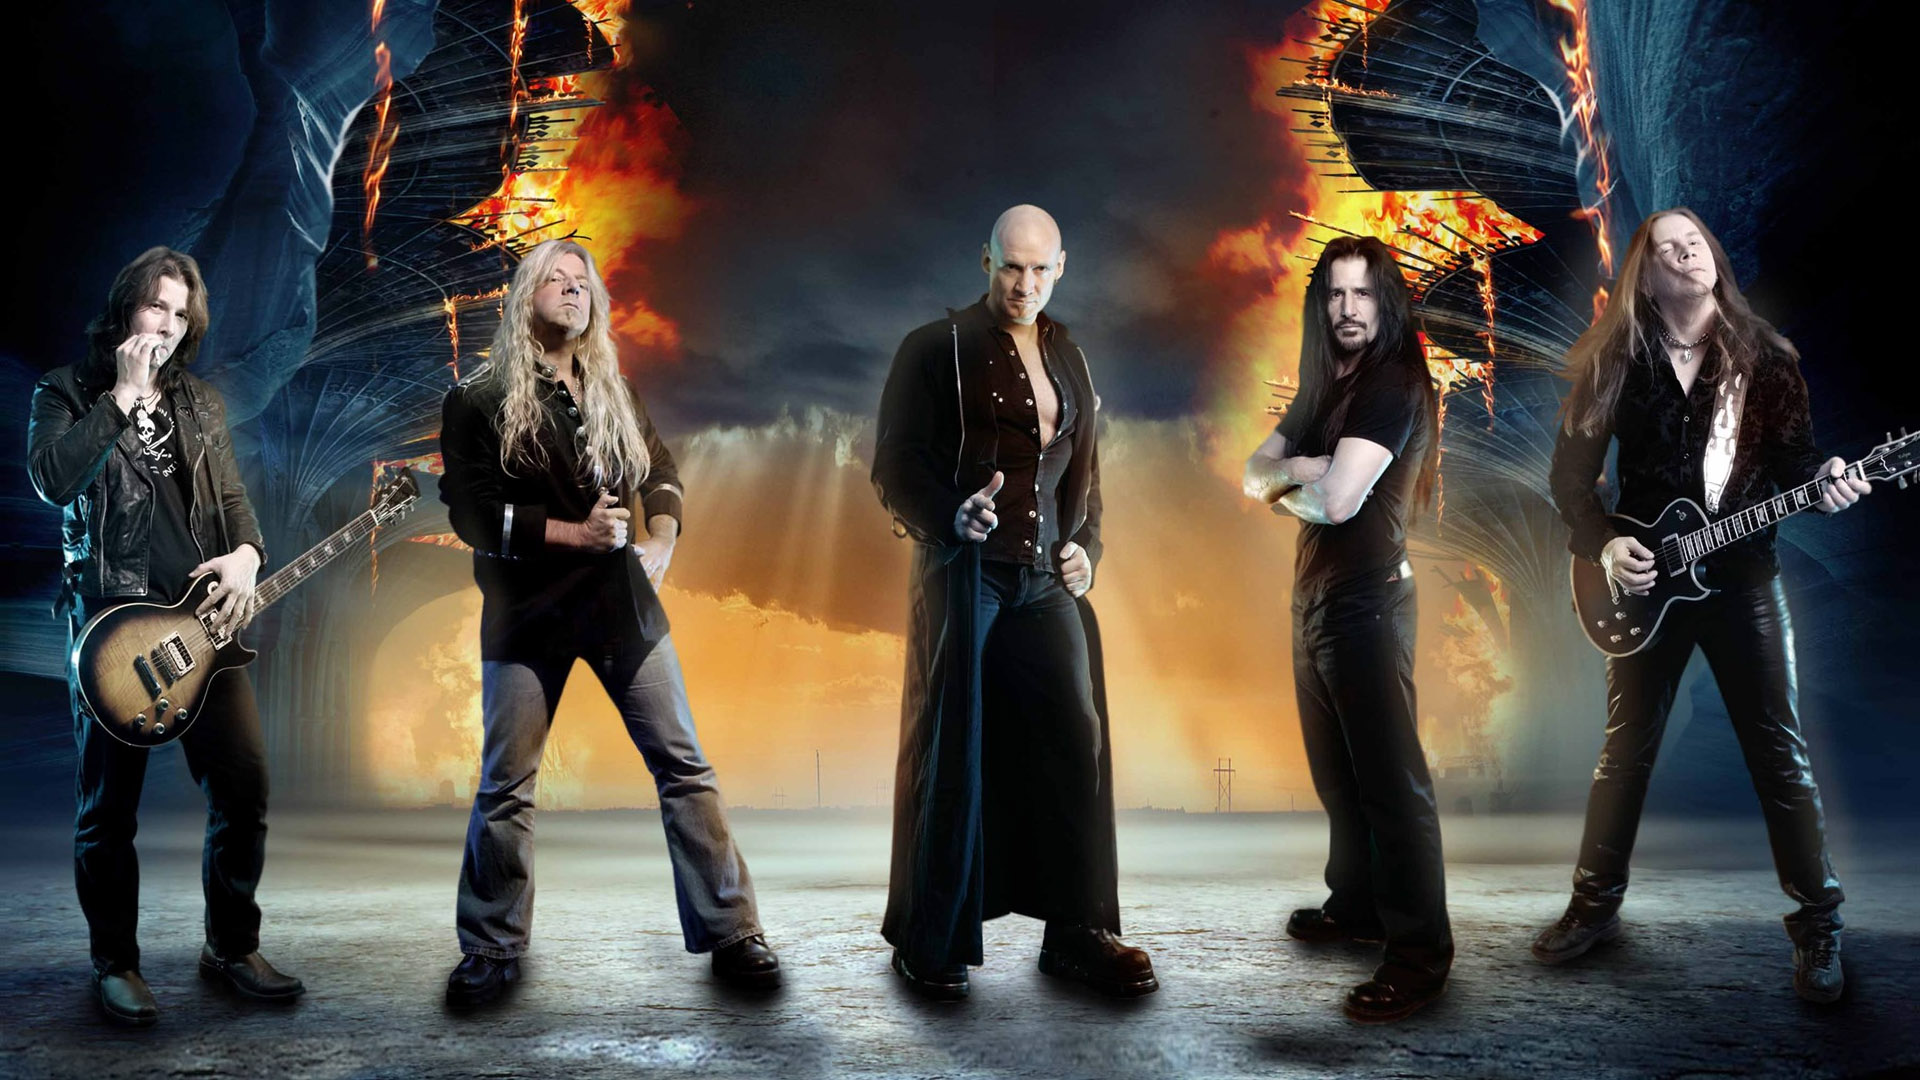 HD Quality Wallpaper | Collection: Music, 1920x1080 Primal Fear